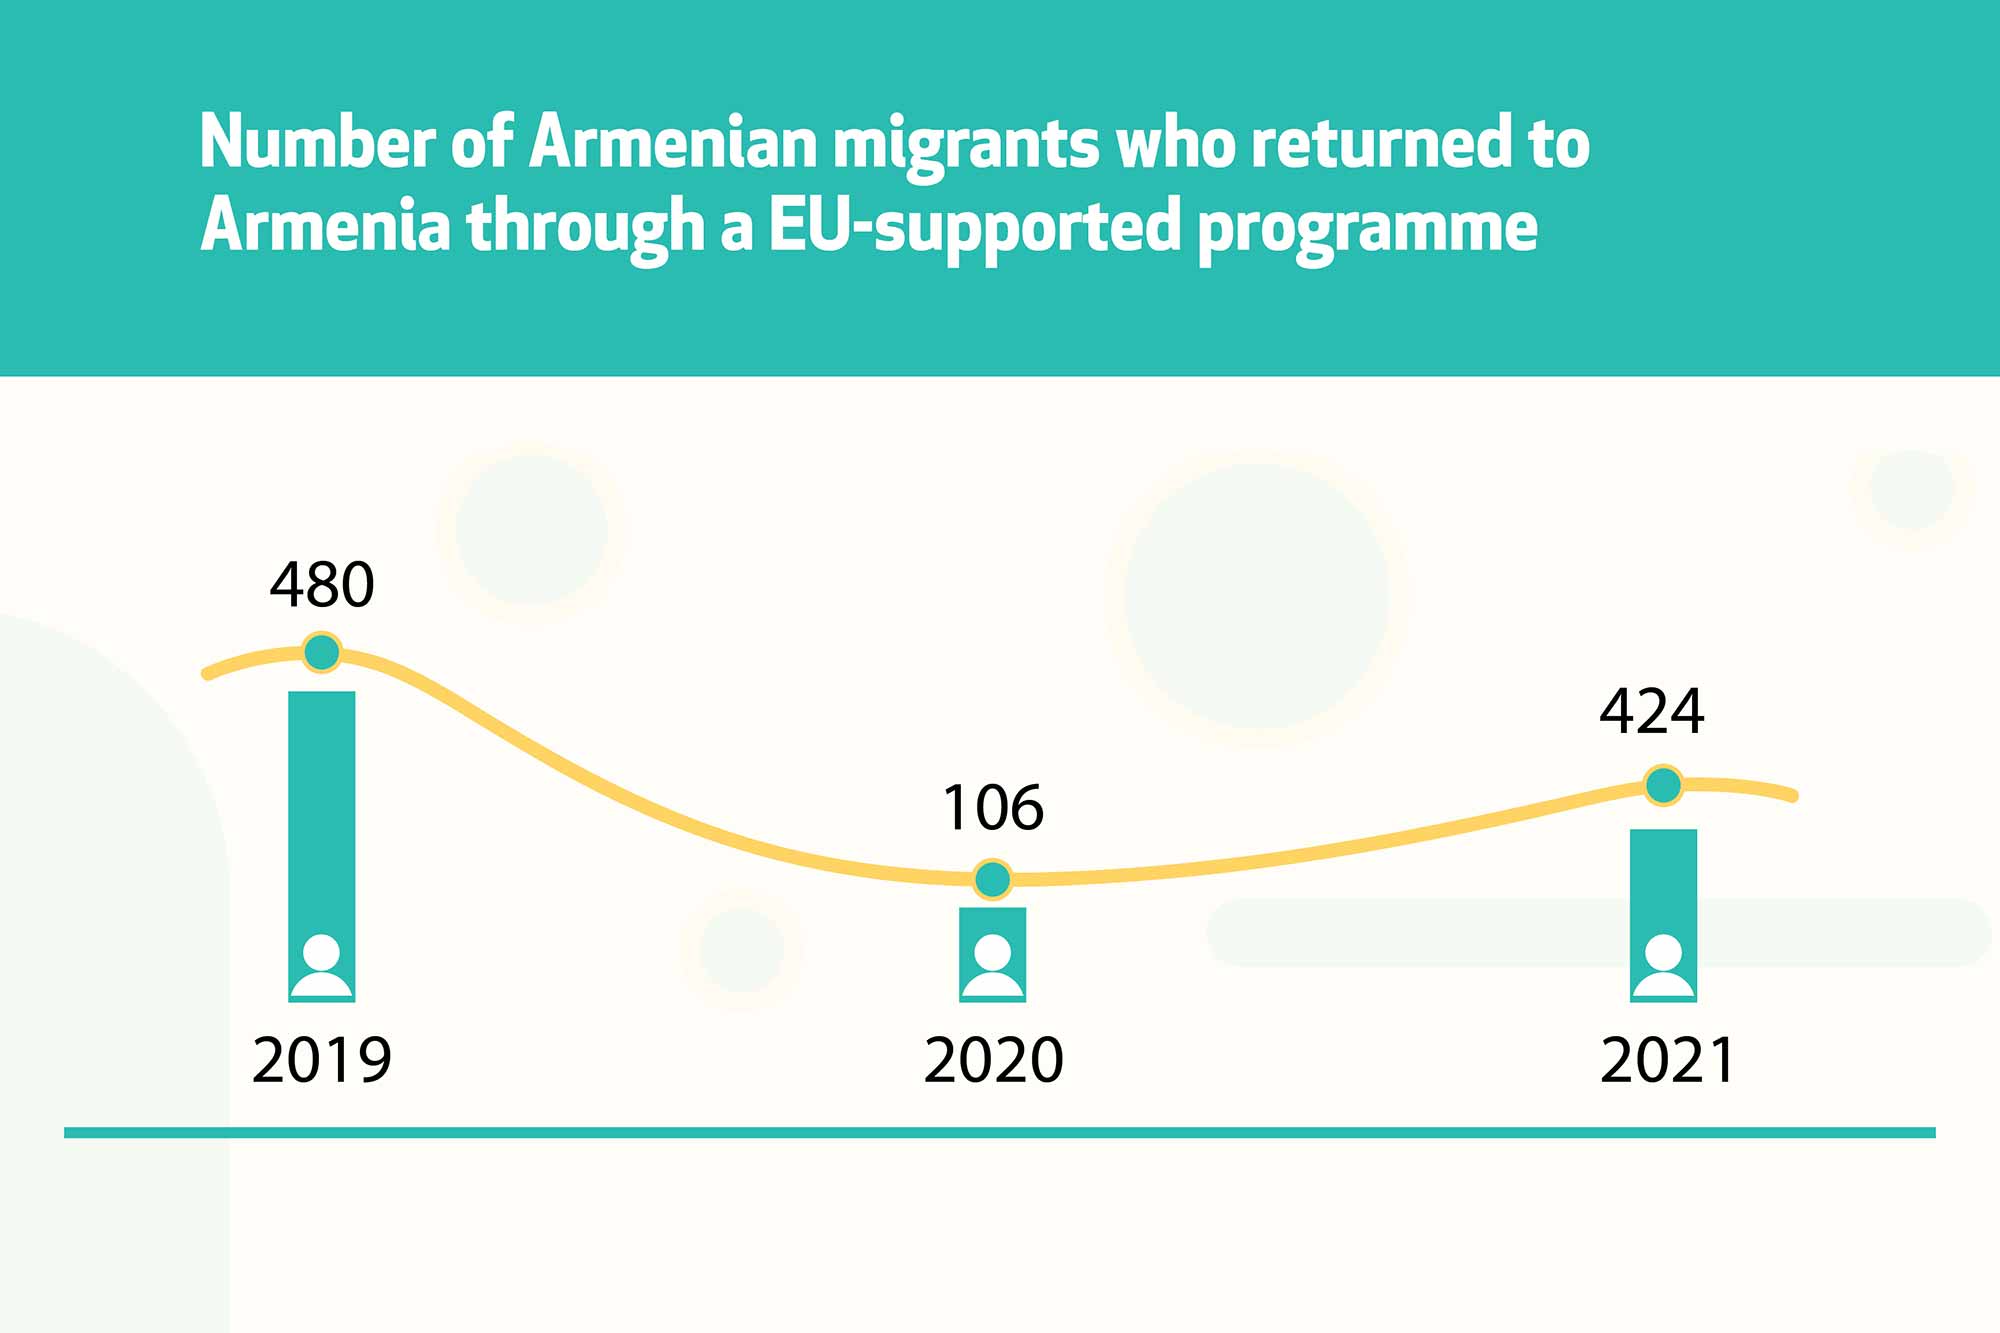 Number of Armenian migrants who returned to Armenia through a EU-supported programme.